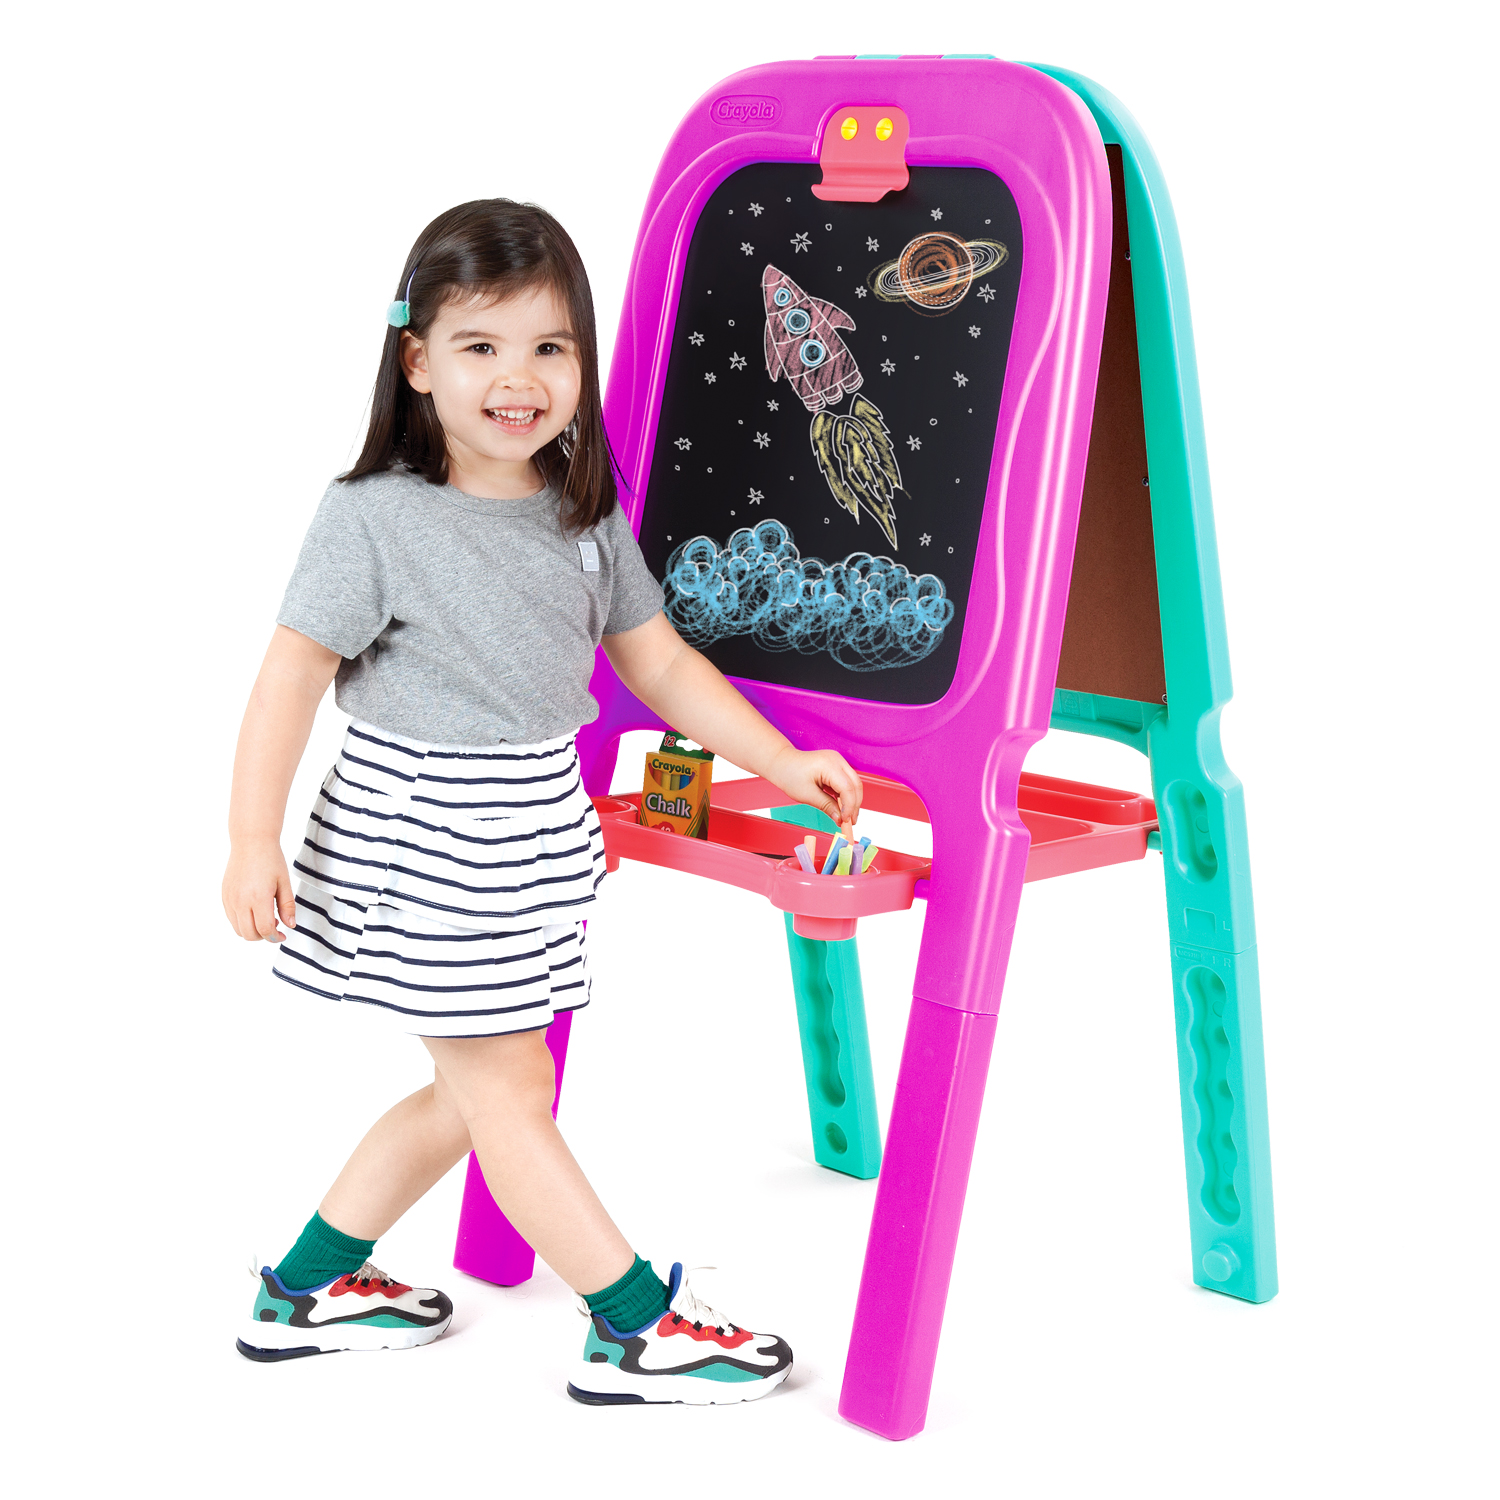 Crayola Purple & Turquoise 3-in-1 Double Easel With Storage, 77 Magnetic Letters/Numbers + 2 Sticker Sheets - image 2 of 8